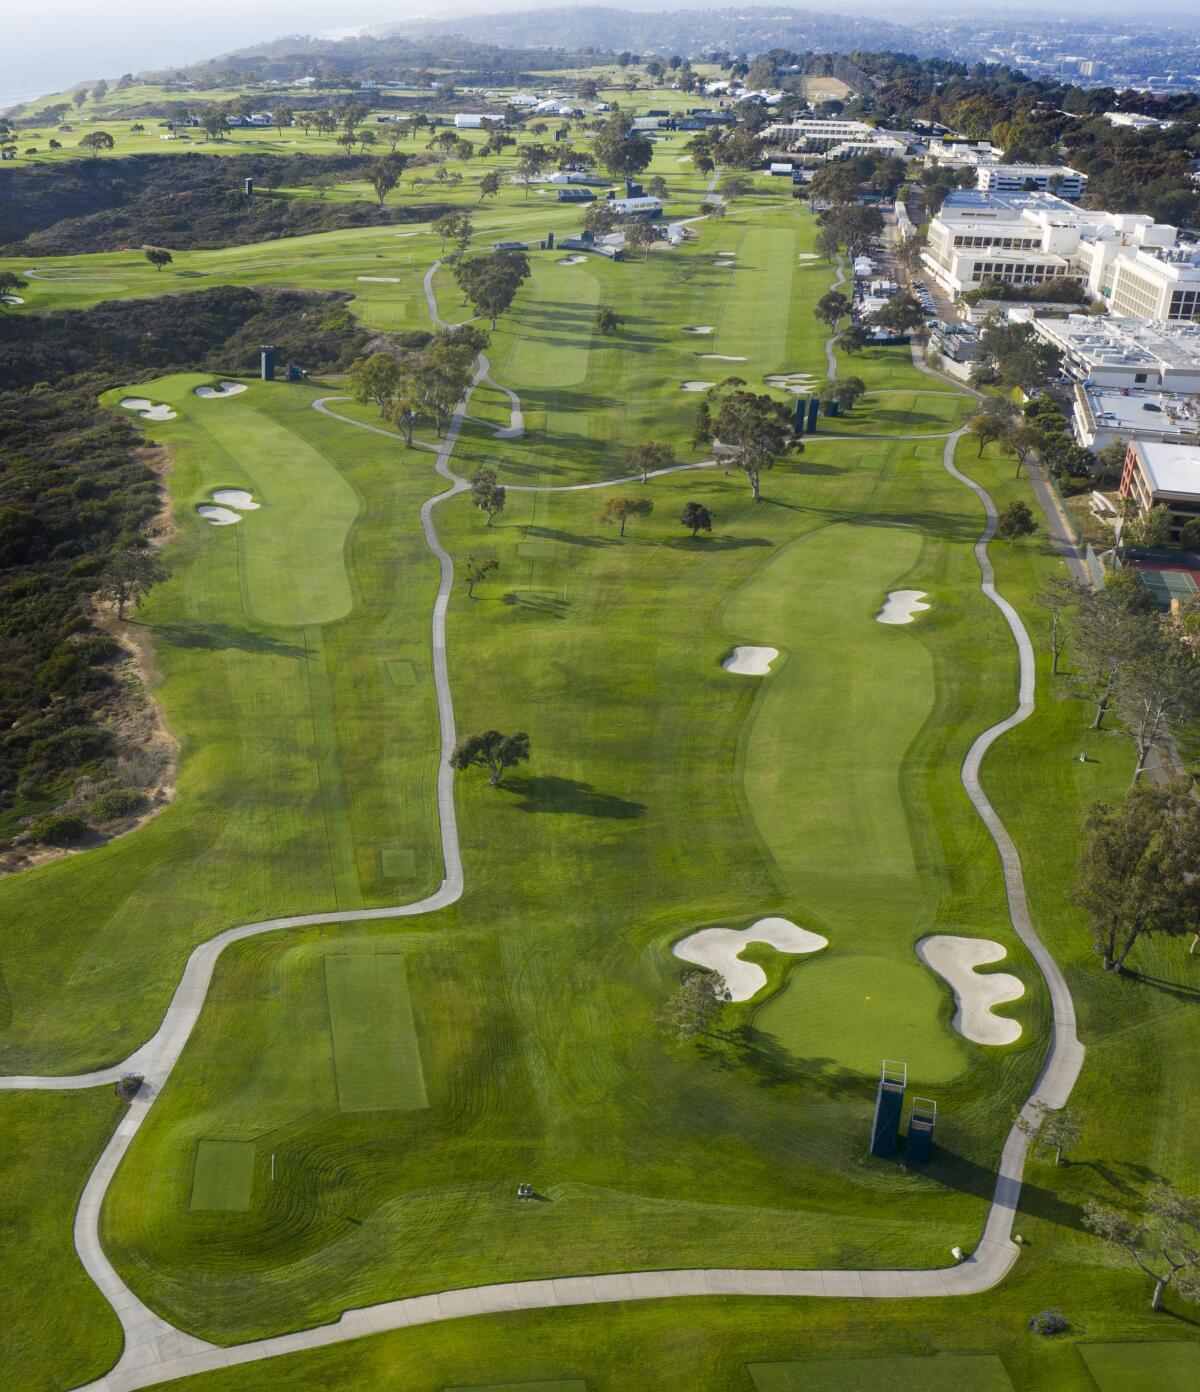 The 14th hole, left, and 10th hole, right, of the Torrey Pines South Course.